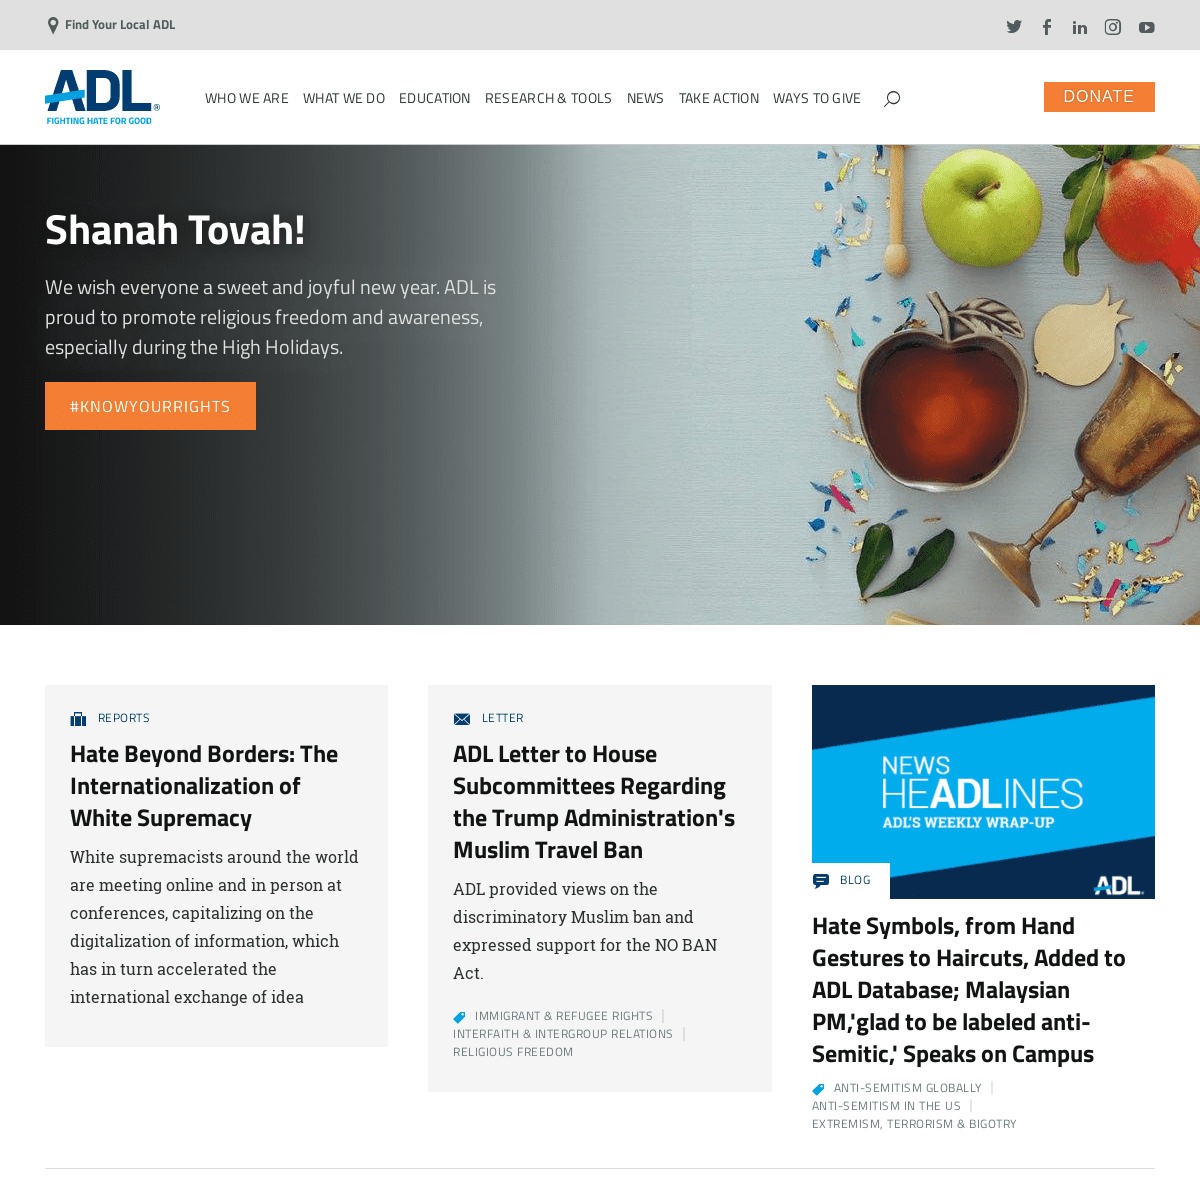 ADL: Fighting Anti-Semitism and Hate